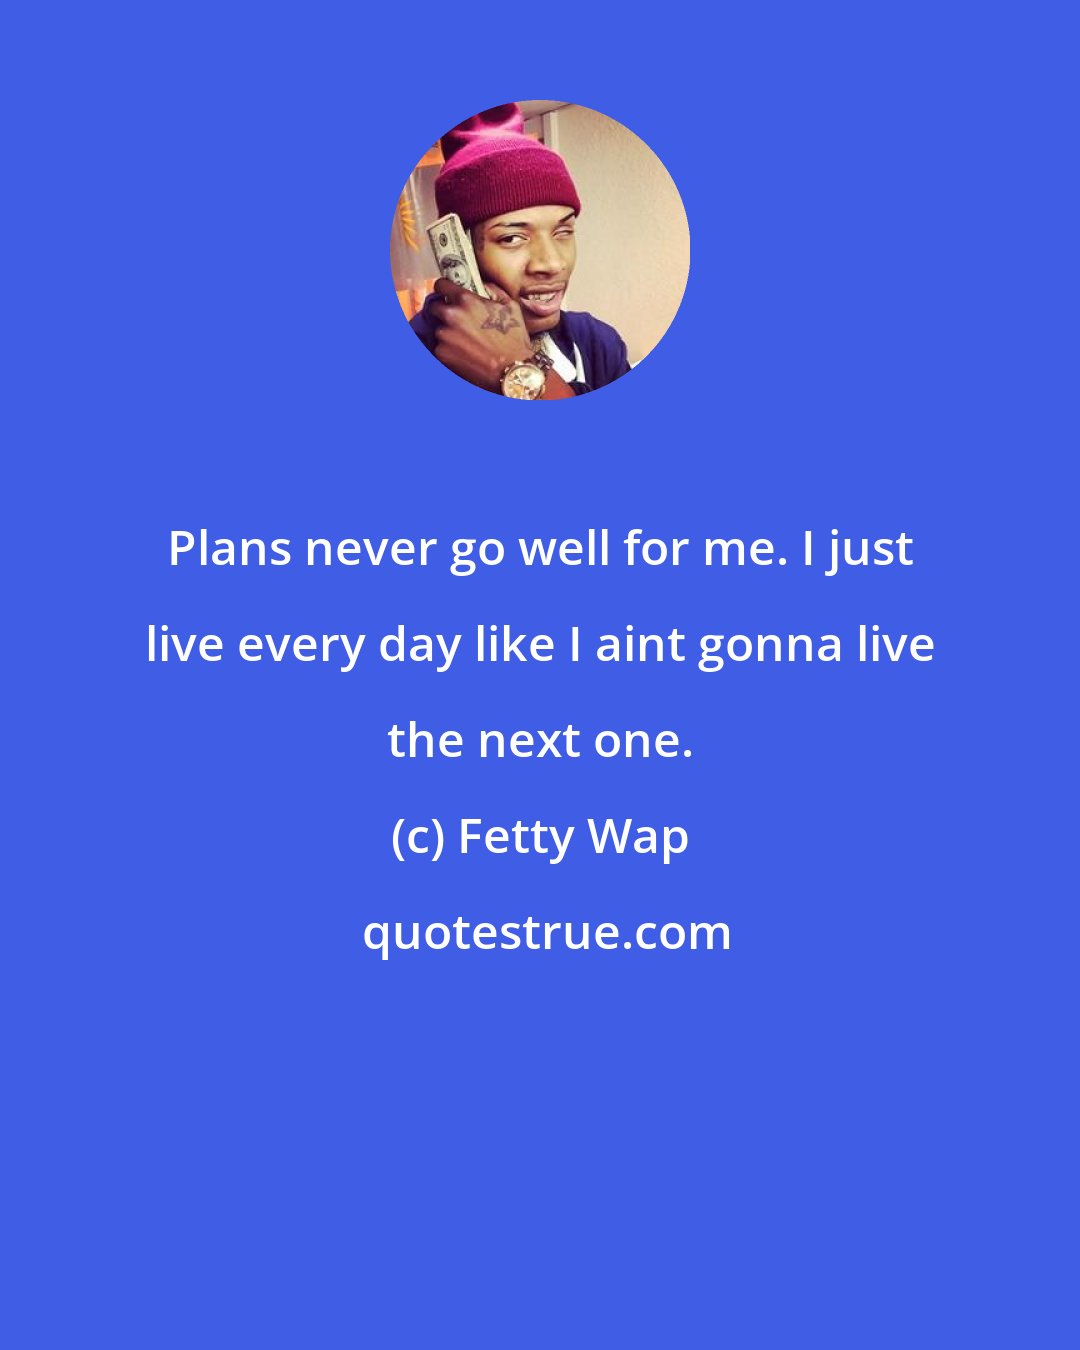 Fetty Wap: Plans never go well for me. I just live every day like I aint gonna live the next one.